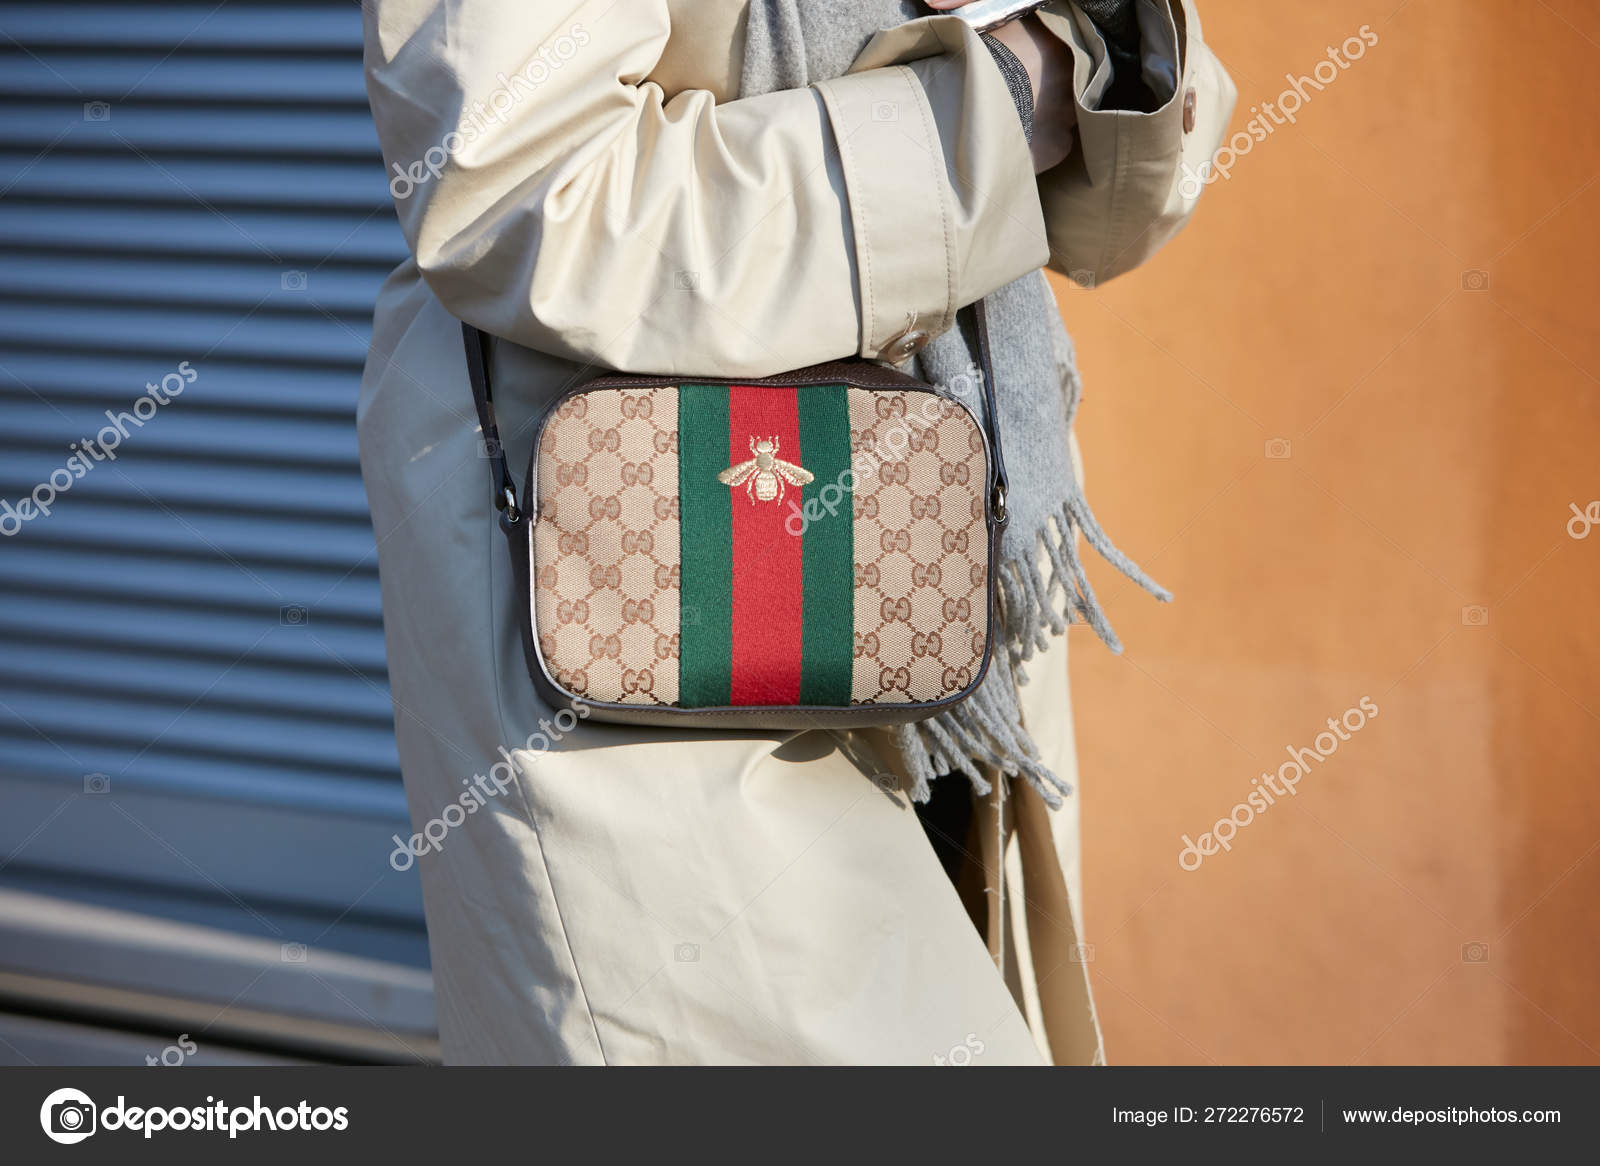 MILAN - JANUARY 13: Woman with Gucci bag with bee and green and